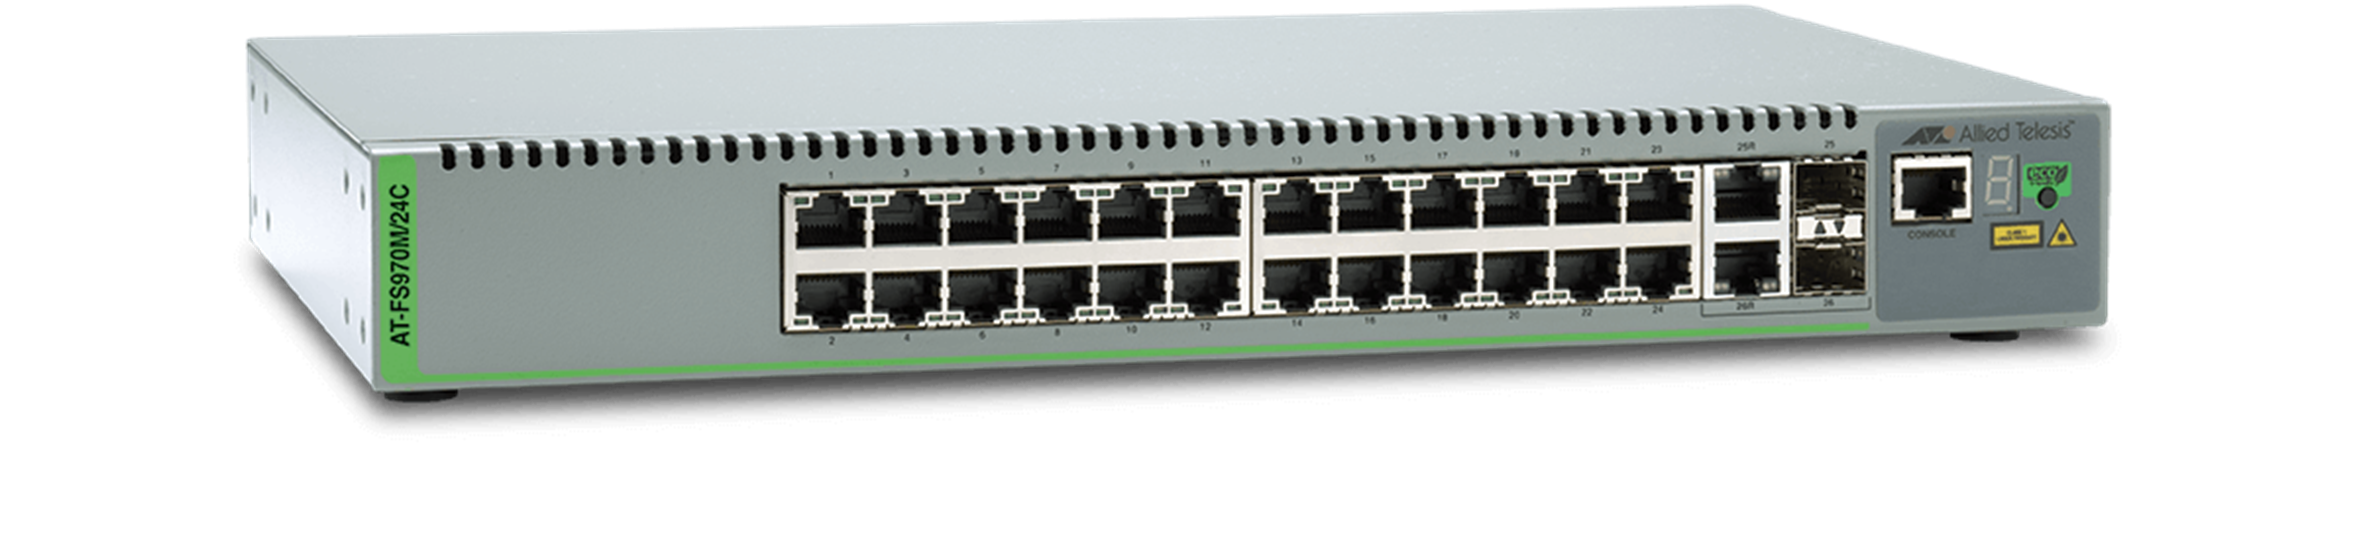 AT-FS970M Series - Layer 2 Fast Ethernet Switch